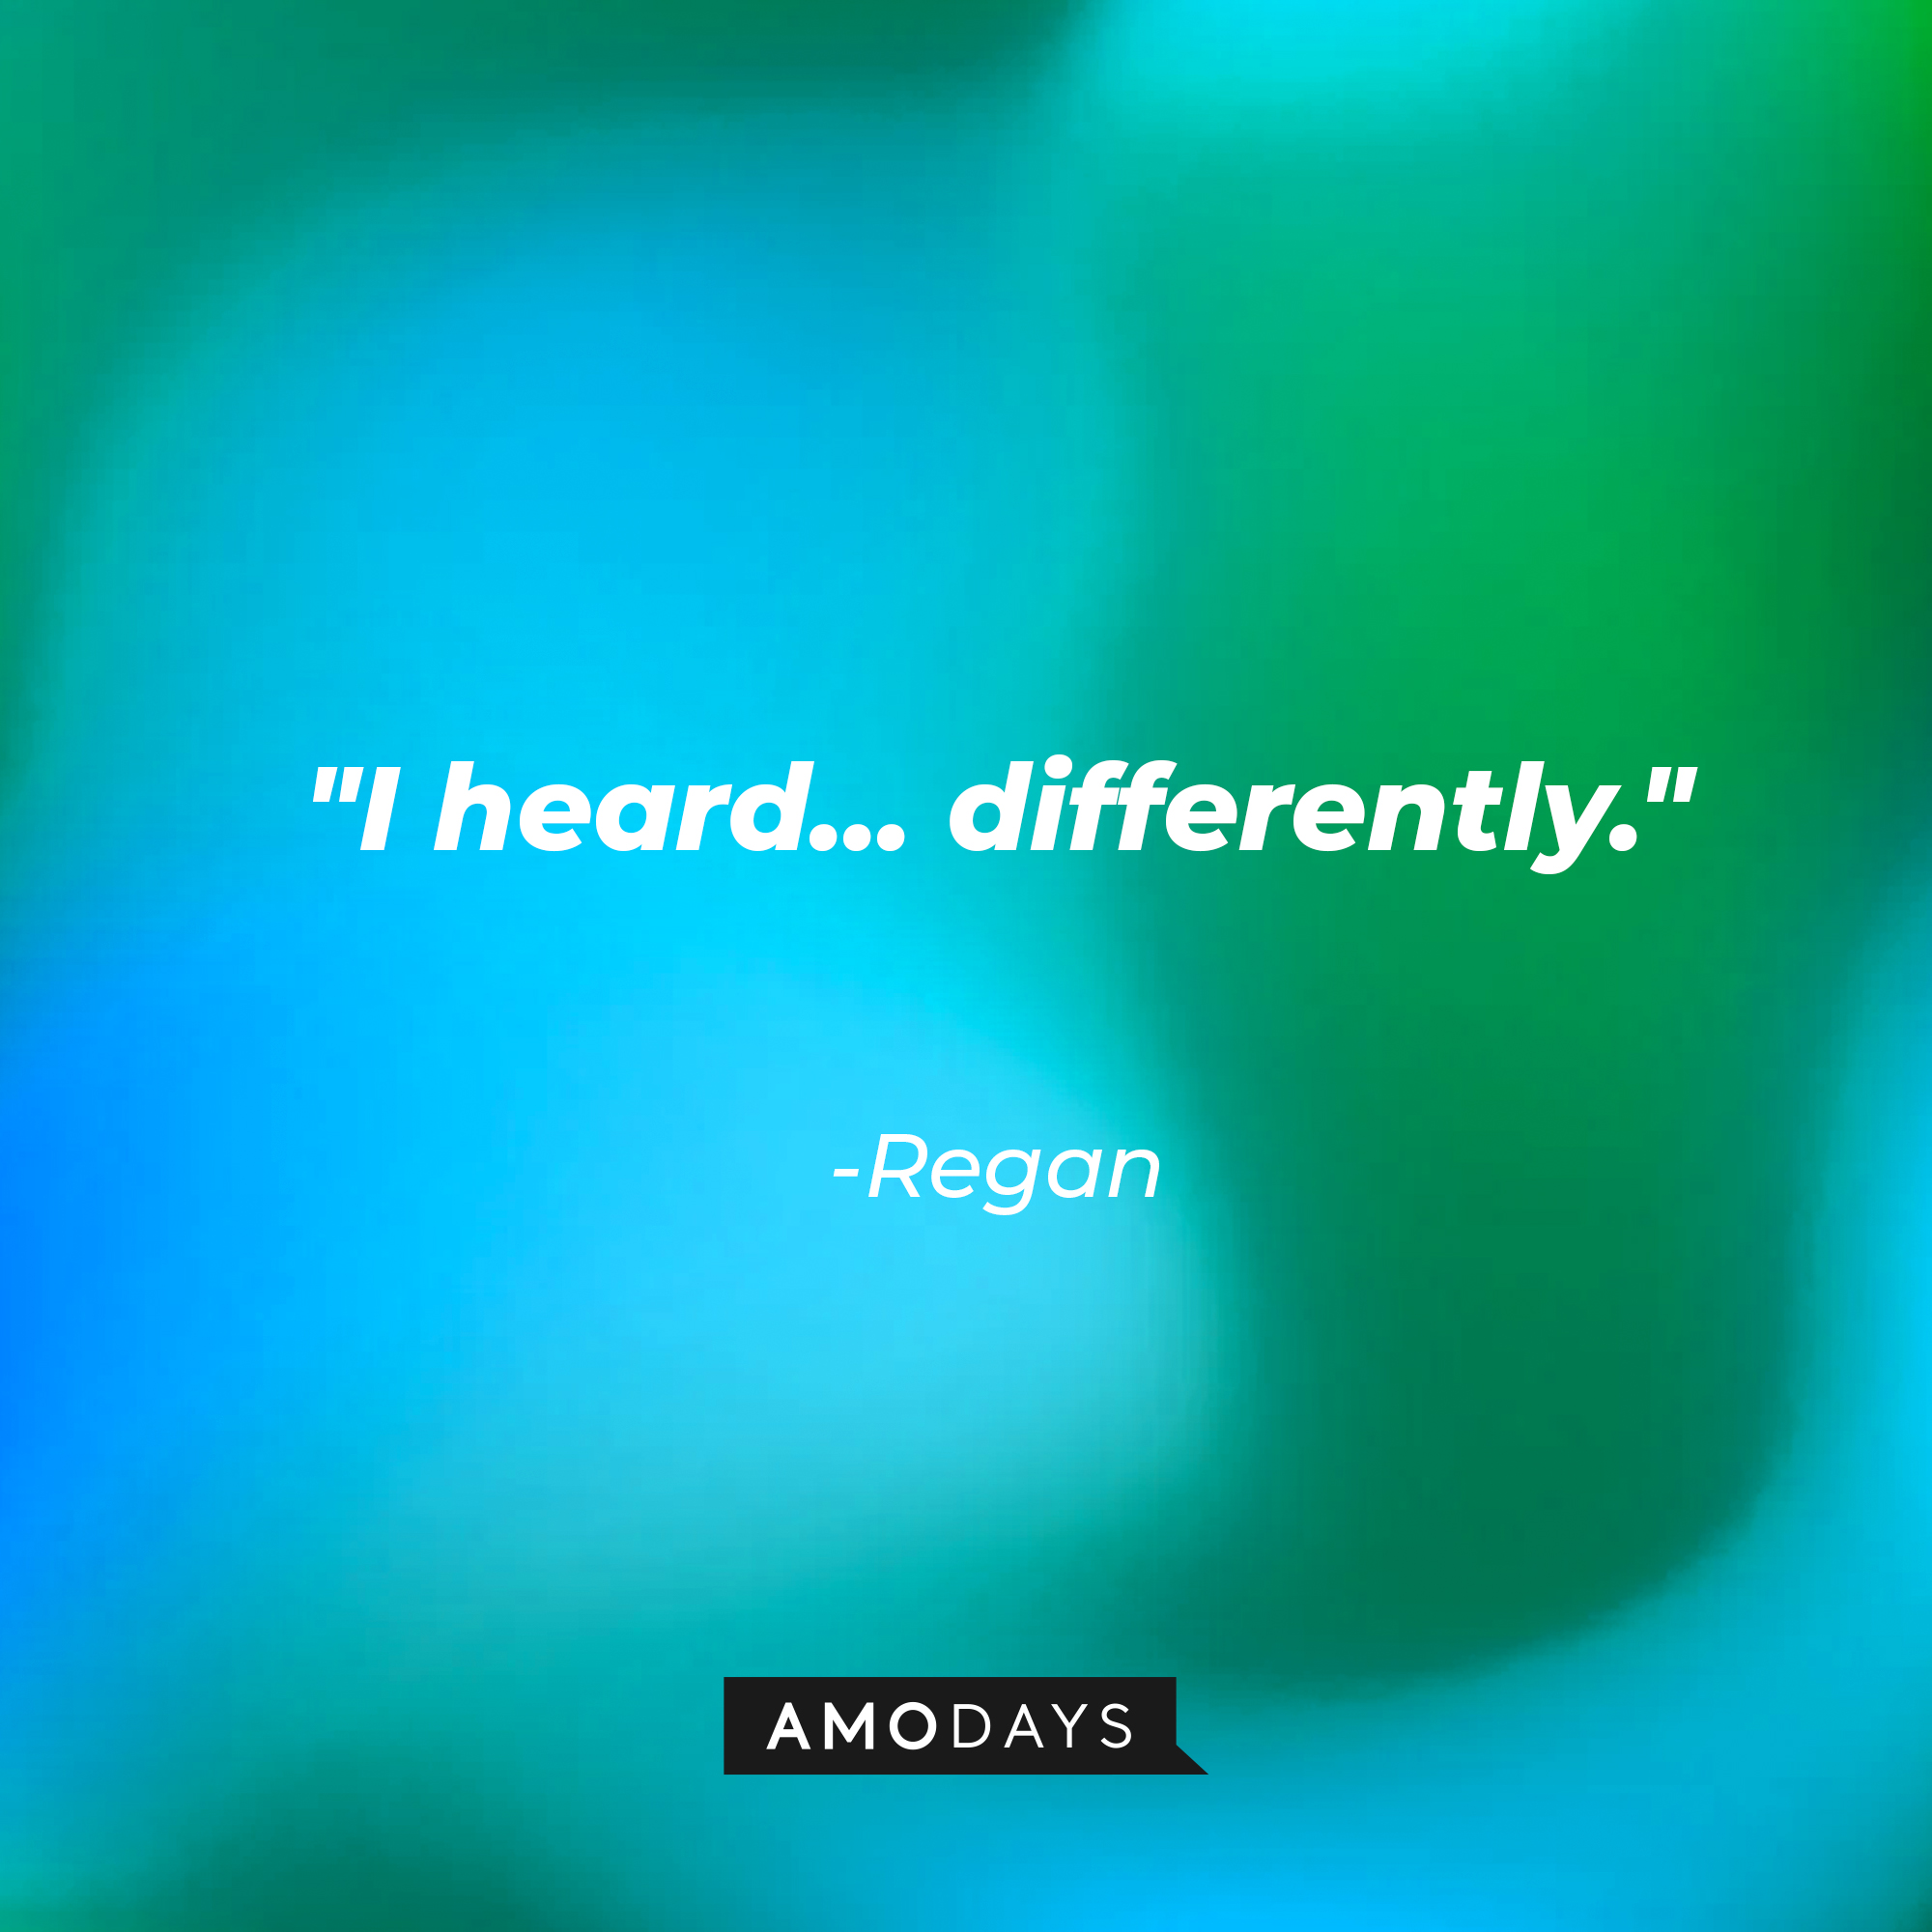 Regan's quote: "I heard... differently." | Source: AmoDAys